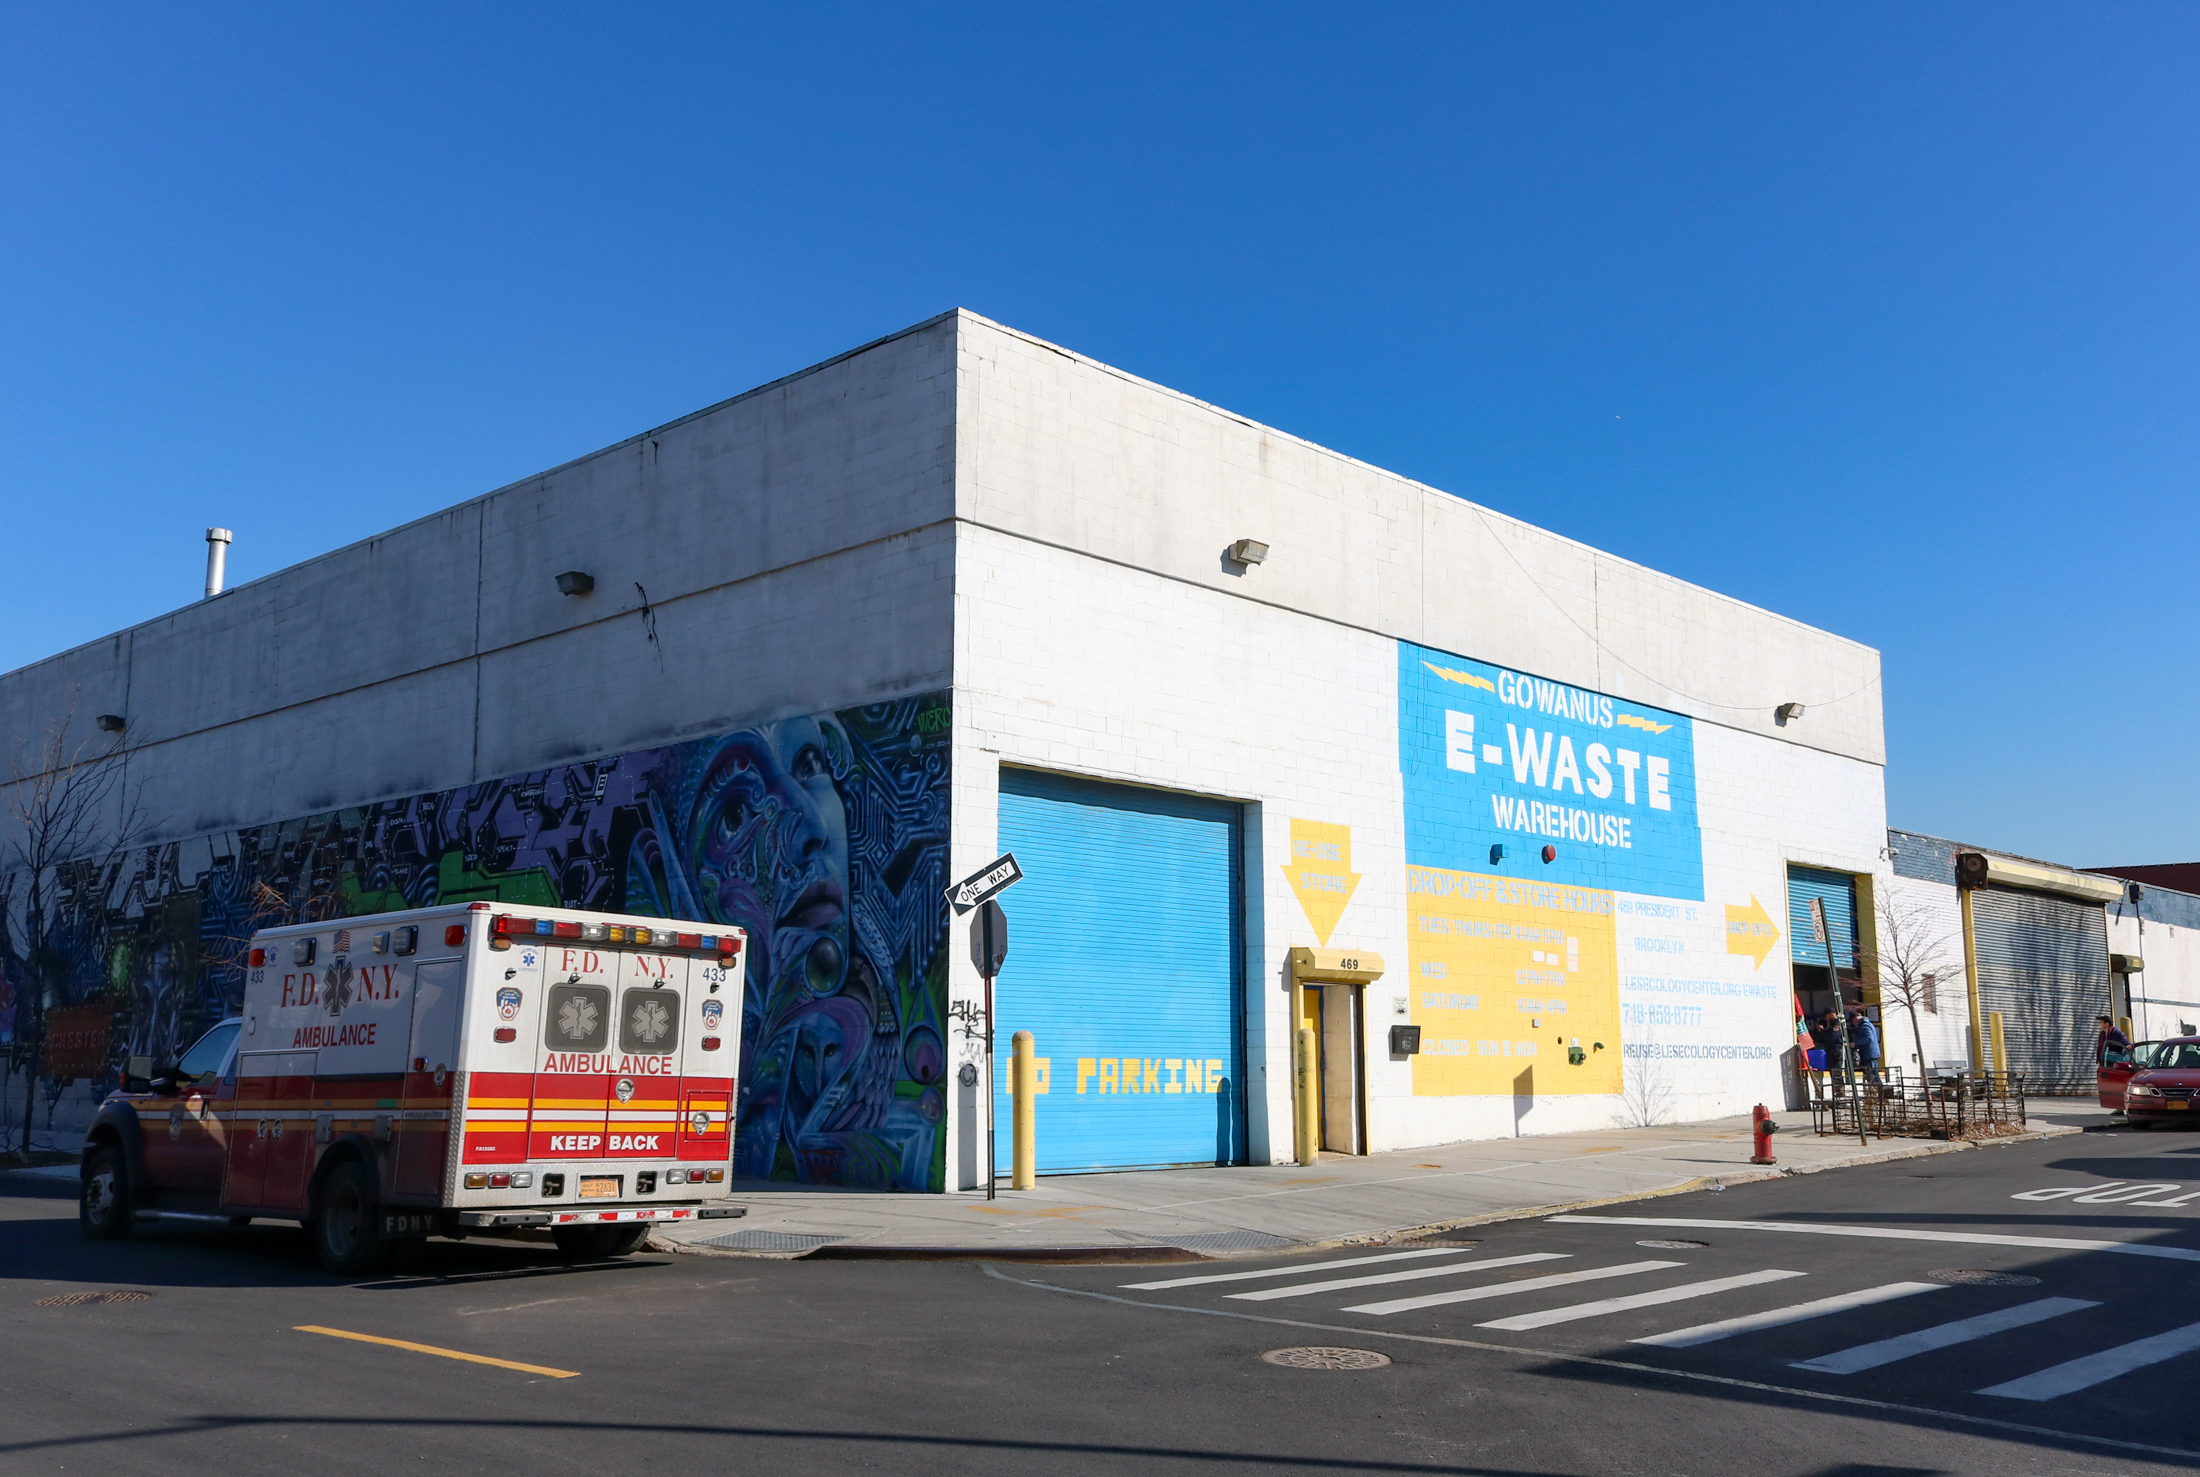 low scale building with mural on one side and painted sign for gowanus e-waste on the other